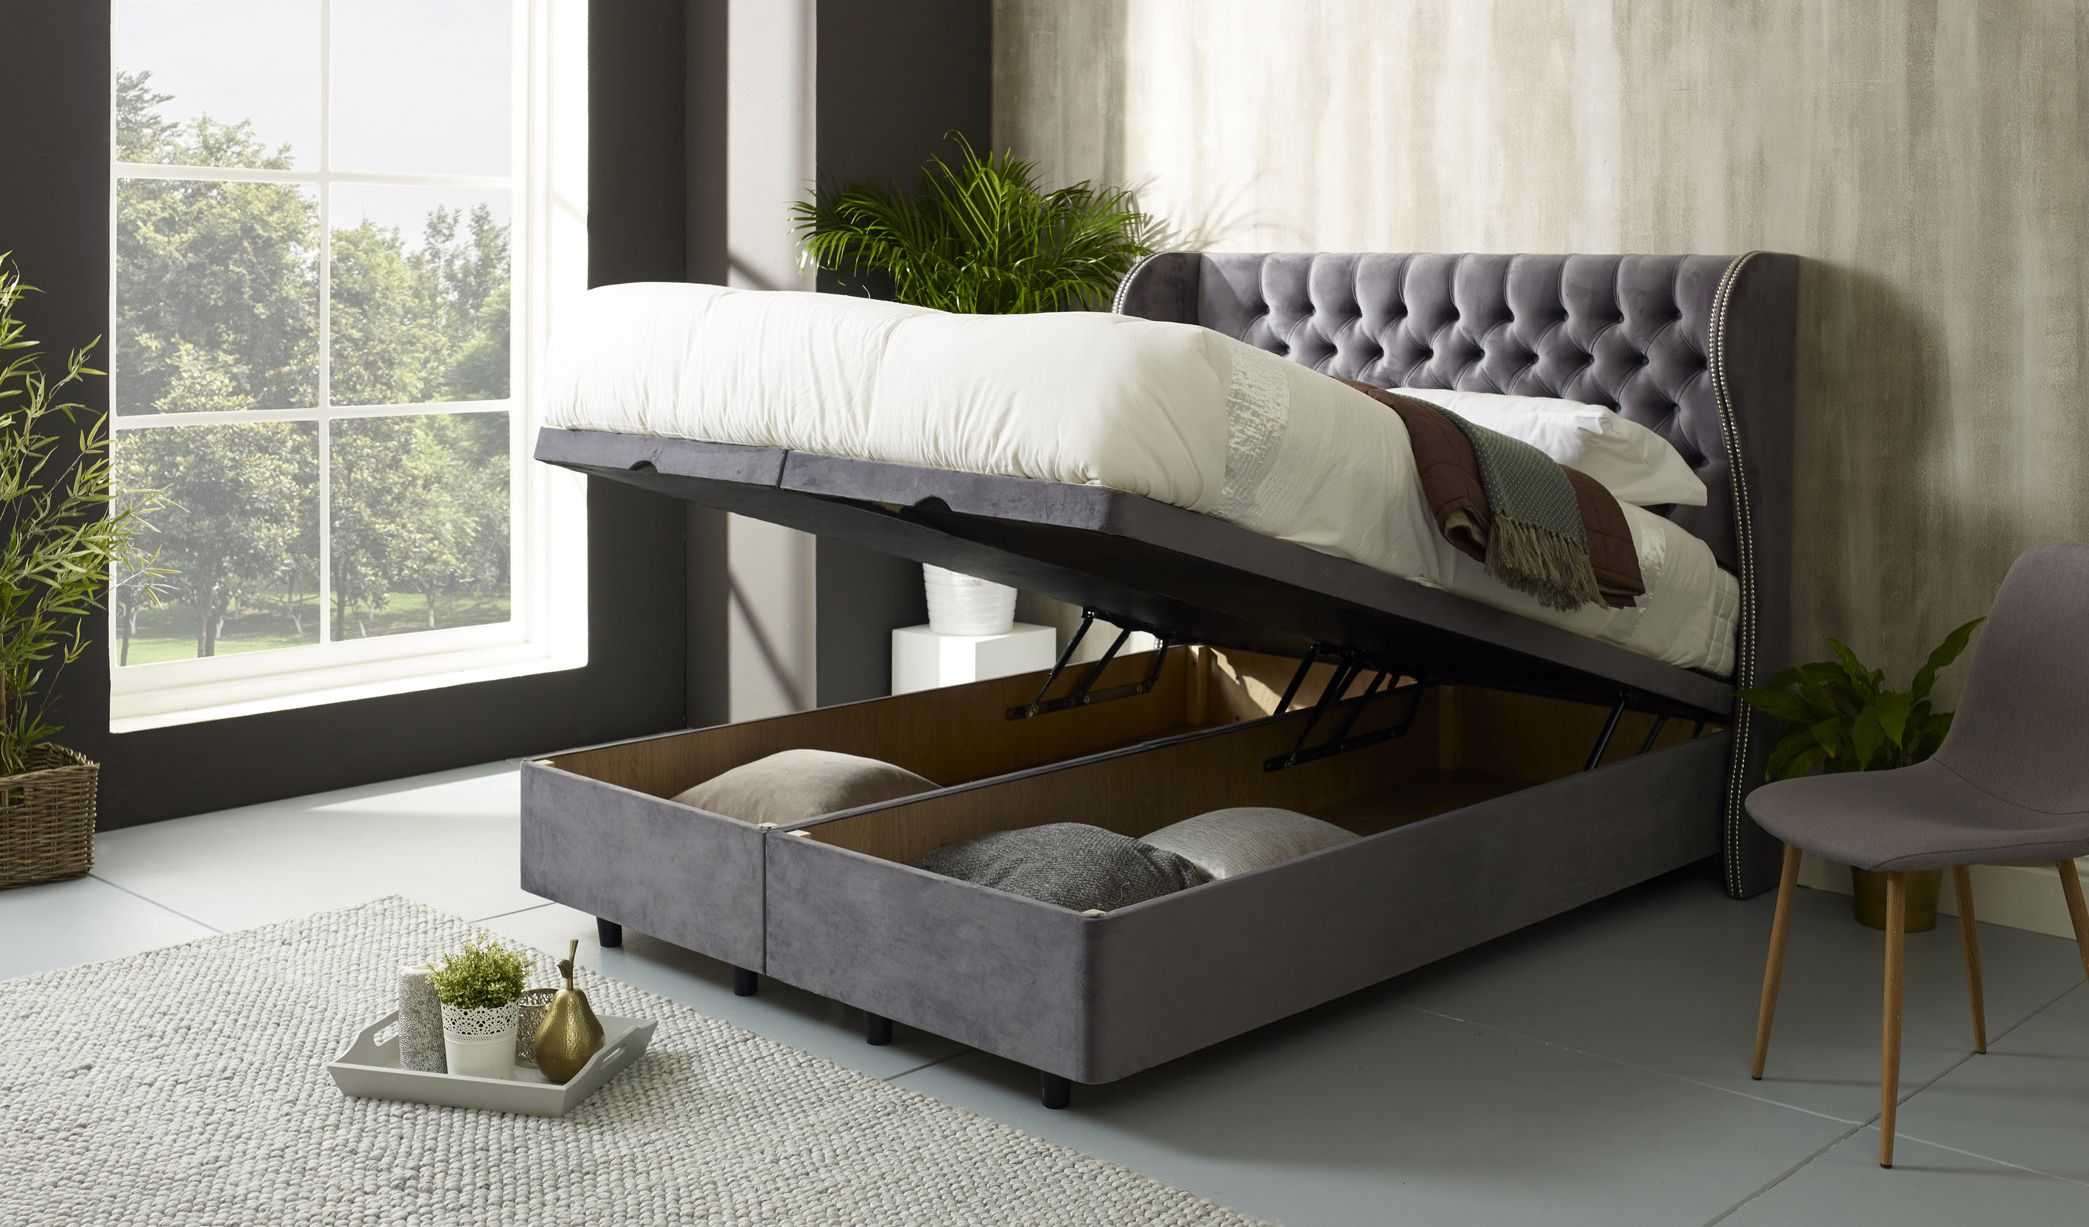 Giovana Wing Floating Ottoman Bed Frame With Studs – Bedworld Within Floating Ottomans (View 16 of 20)